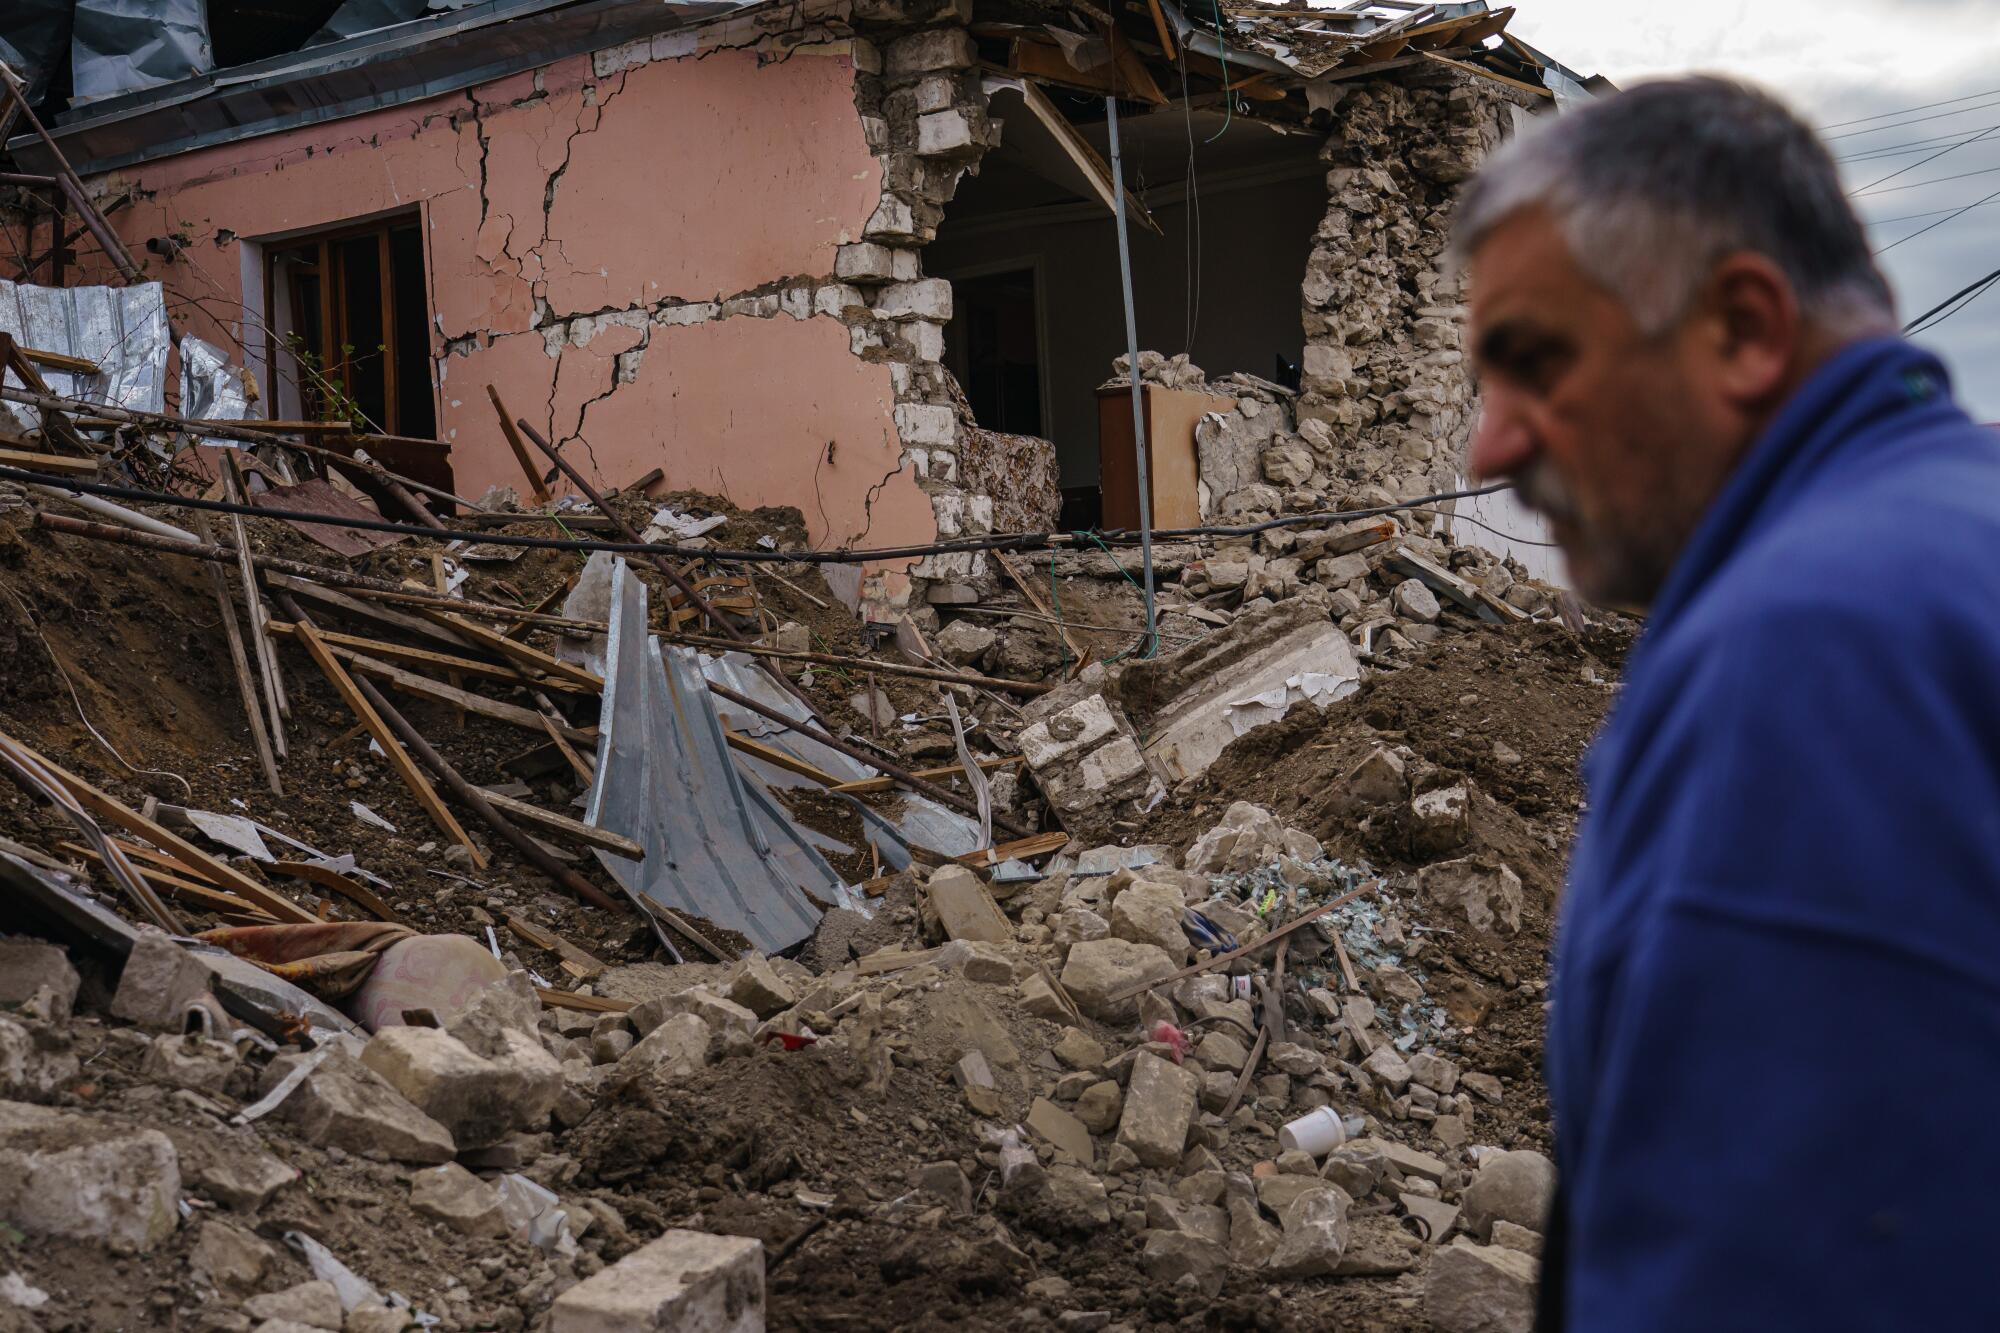 David Safaryan, 63, looks over the rubble of a destroyed home after a military strike in a residential neighborhood.